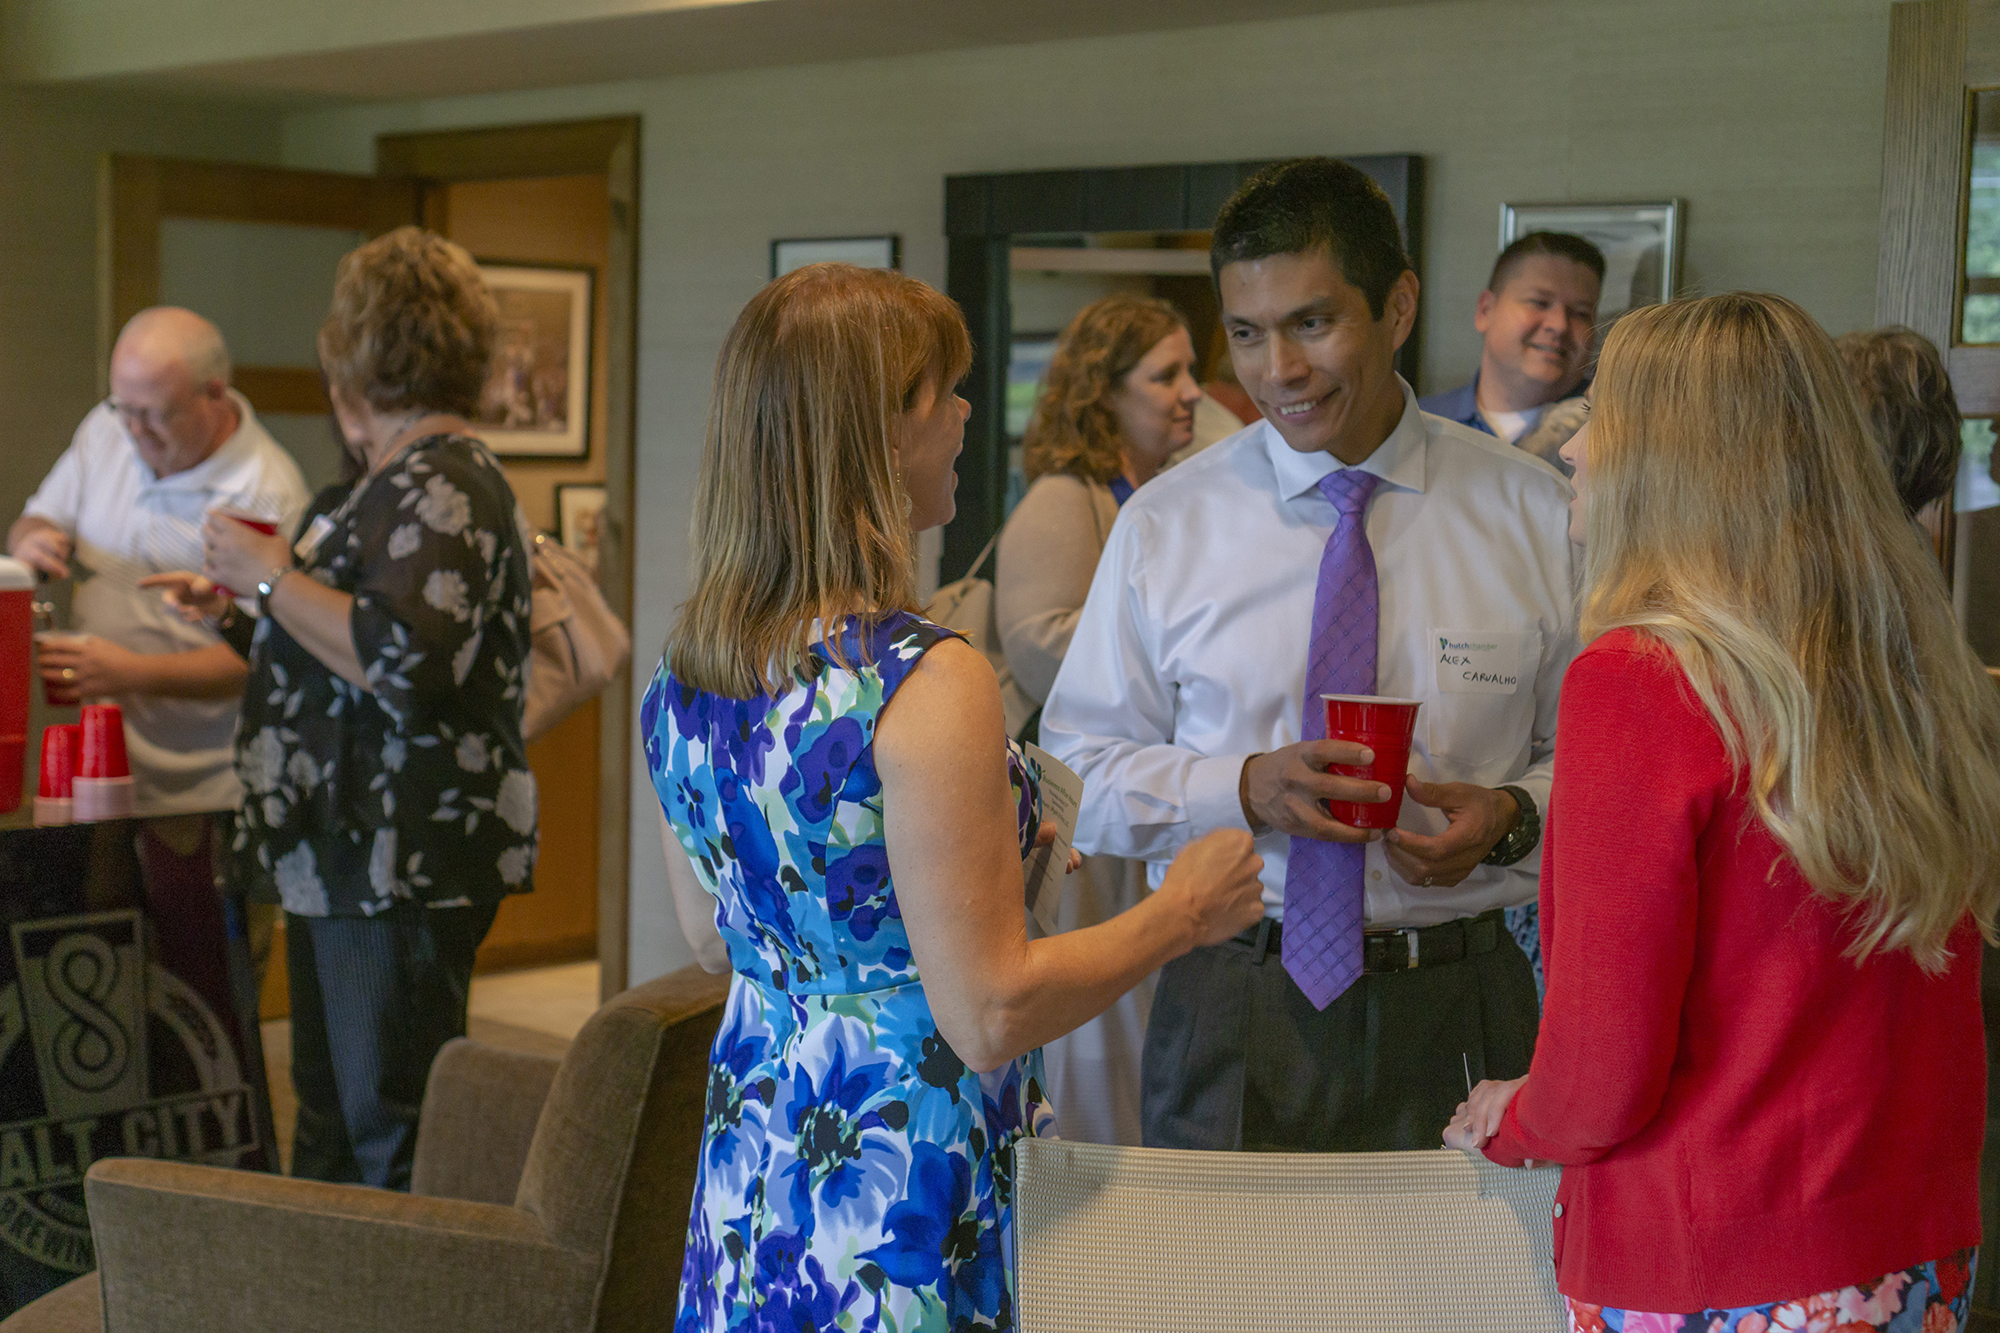 Main Photo for August Business After Hours at Mann, Wyatt & Rice - 1